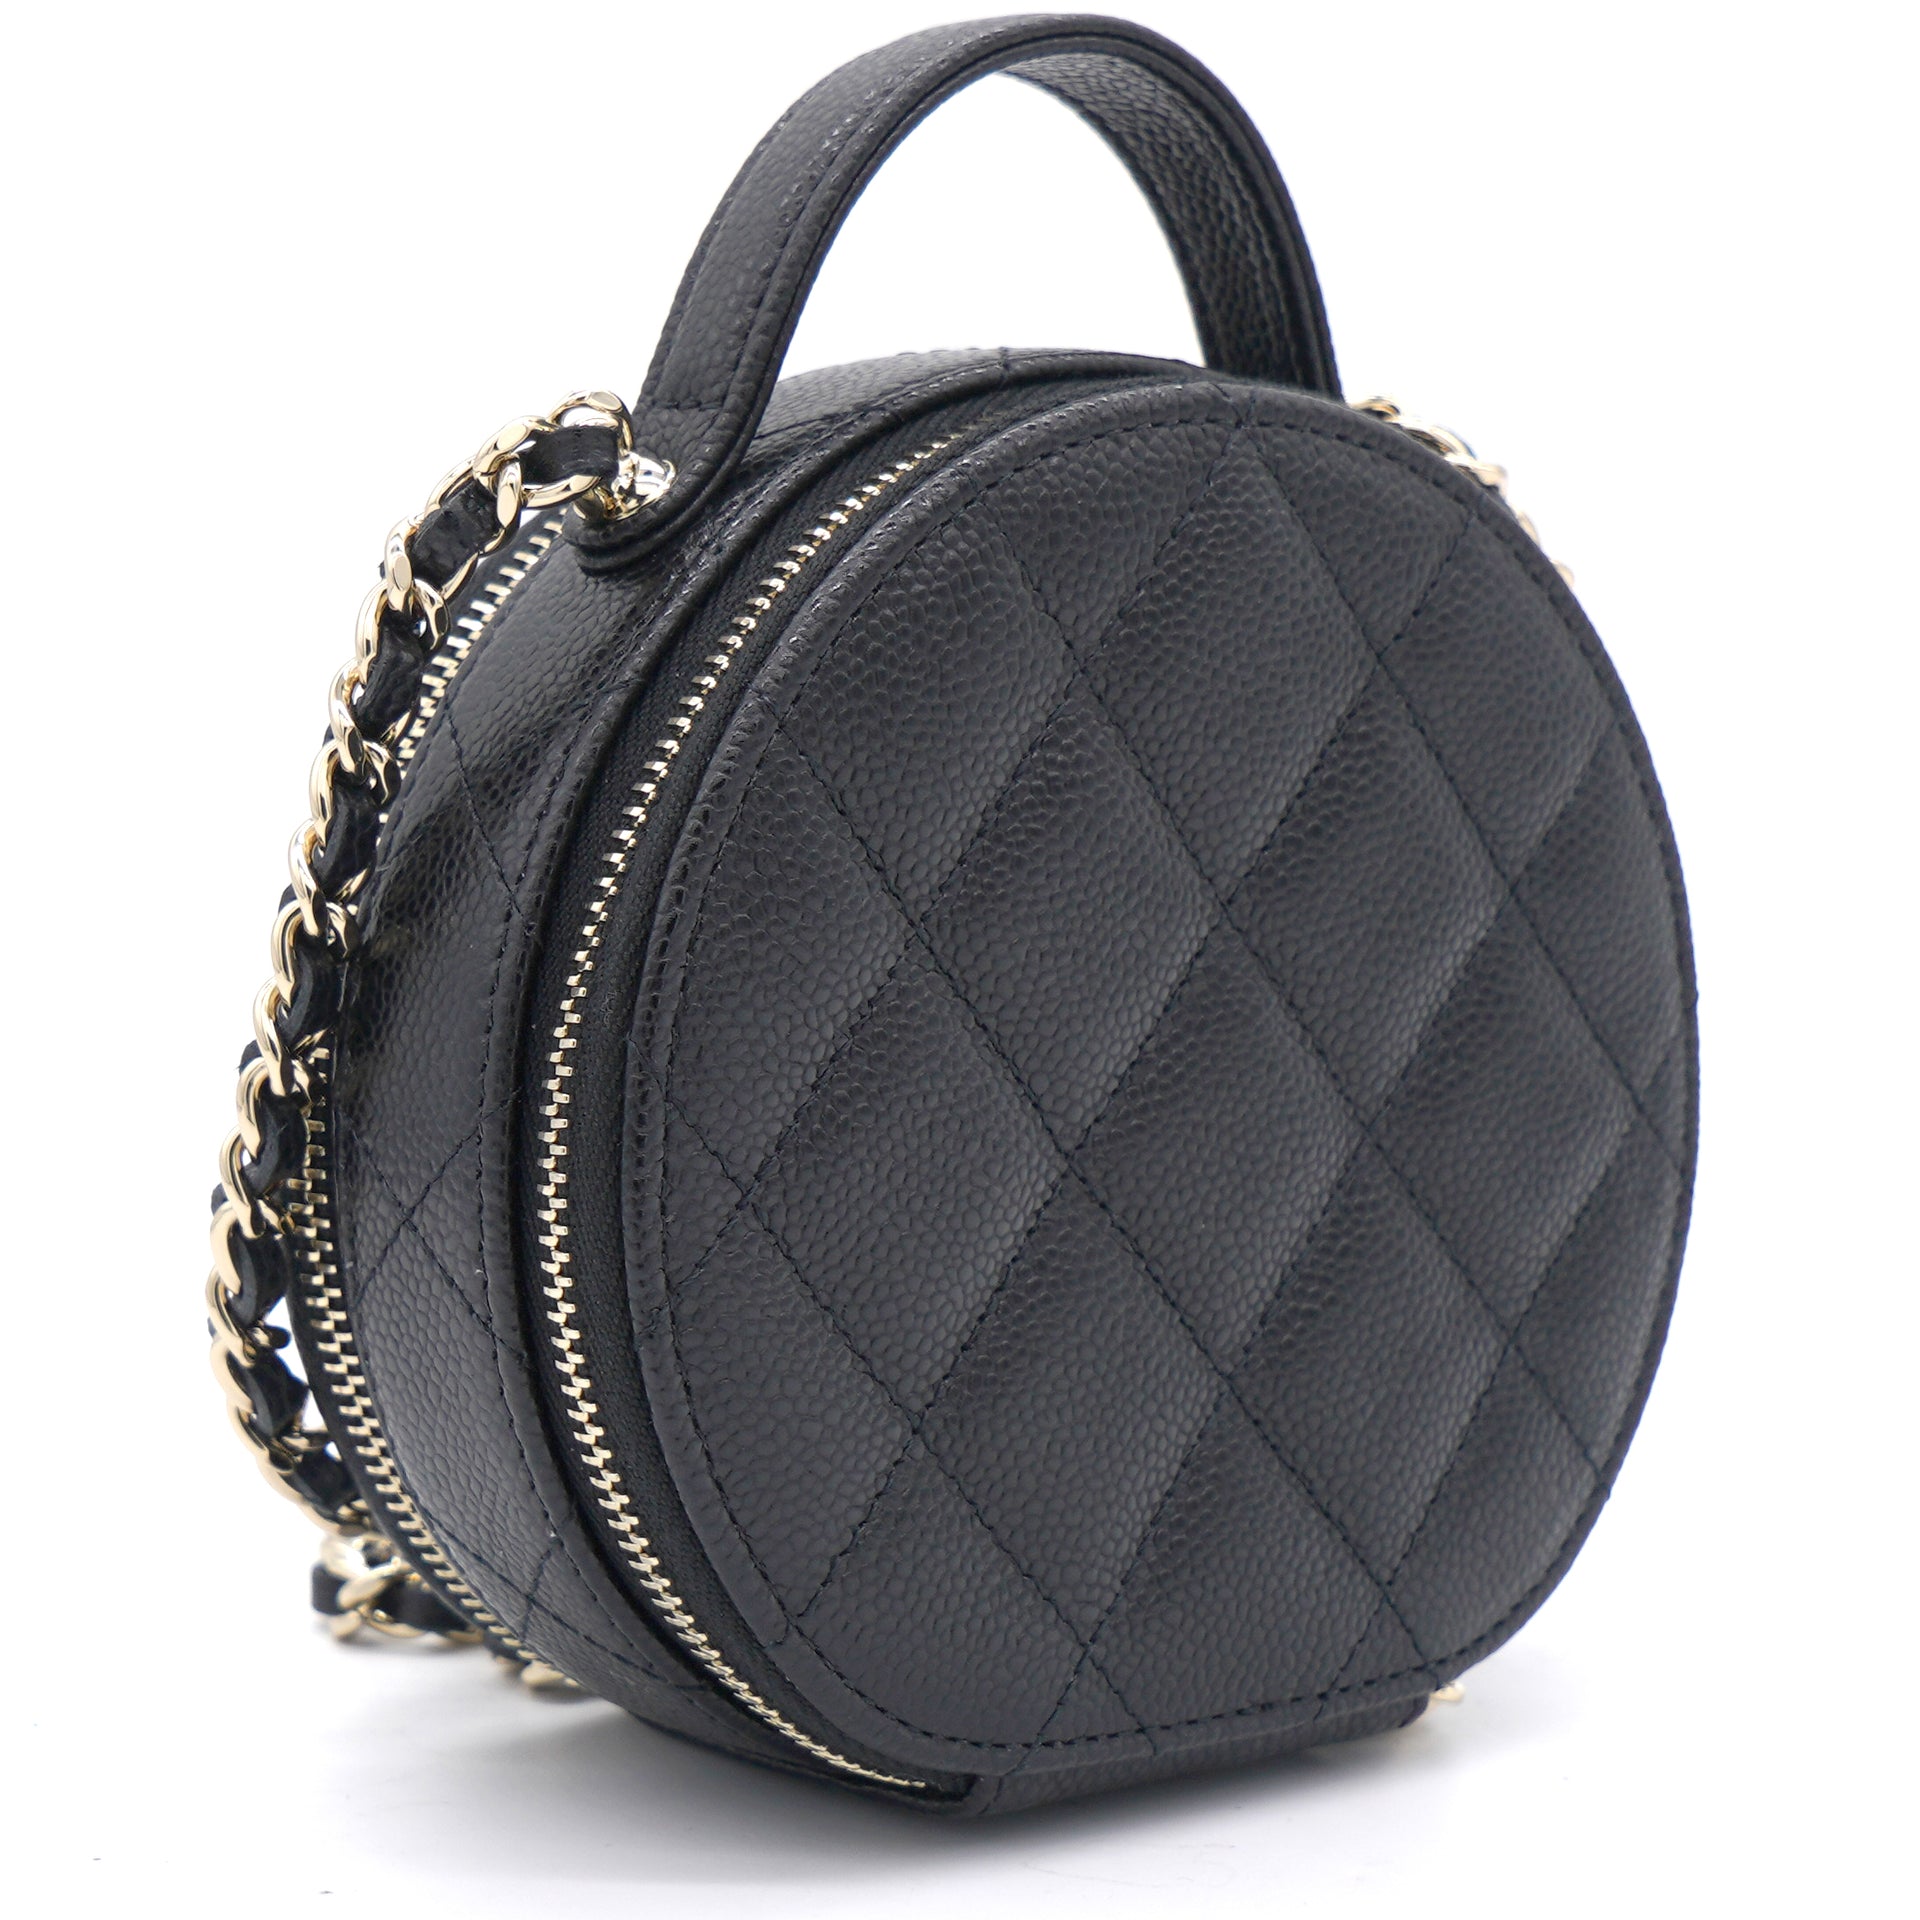 Chanel Black Quilted Patent Leather Round 'CC' Bag Q6BJHX27KB003